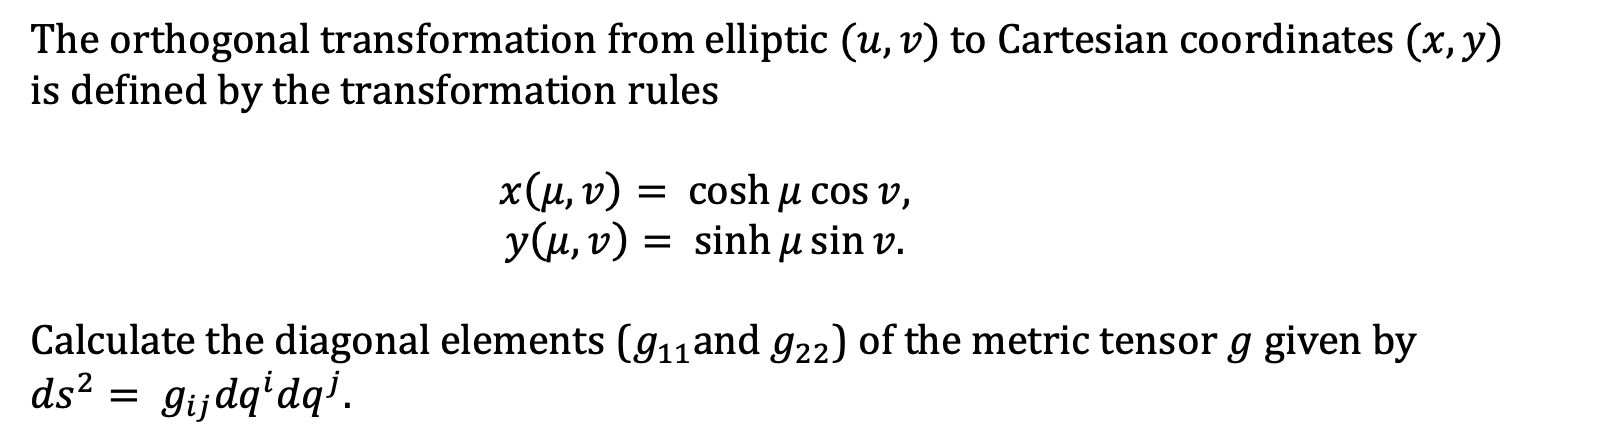 The orthogonal transformation from elliptic (u,v) to Cartesian coordinates (x,y) is defined by the transformation rules